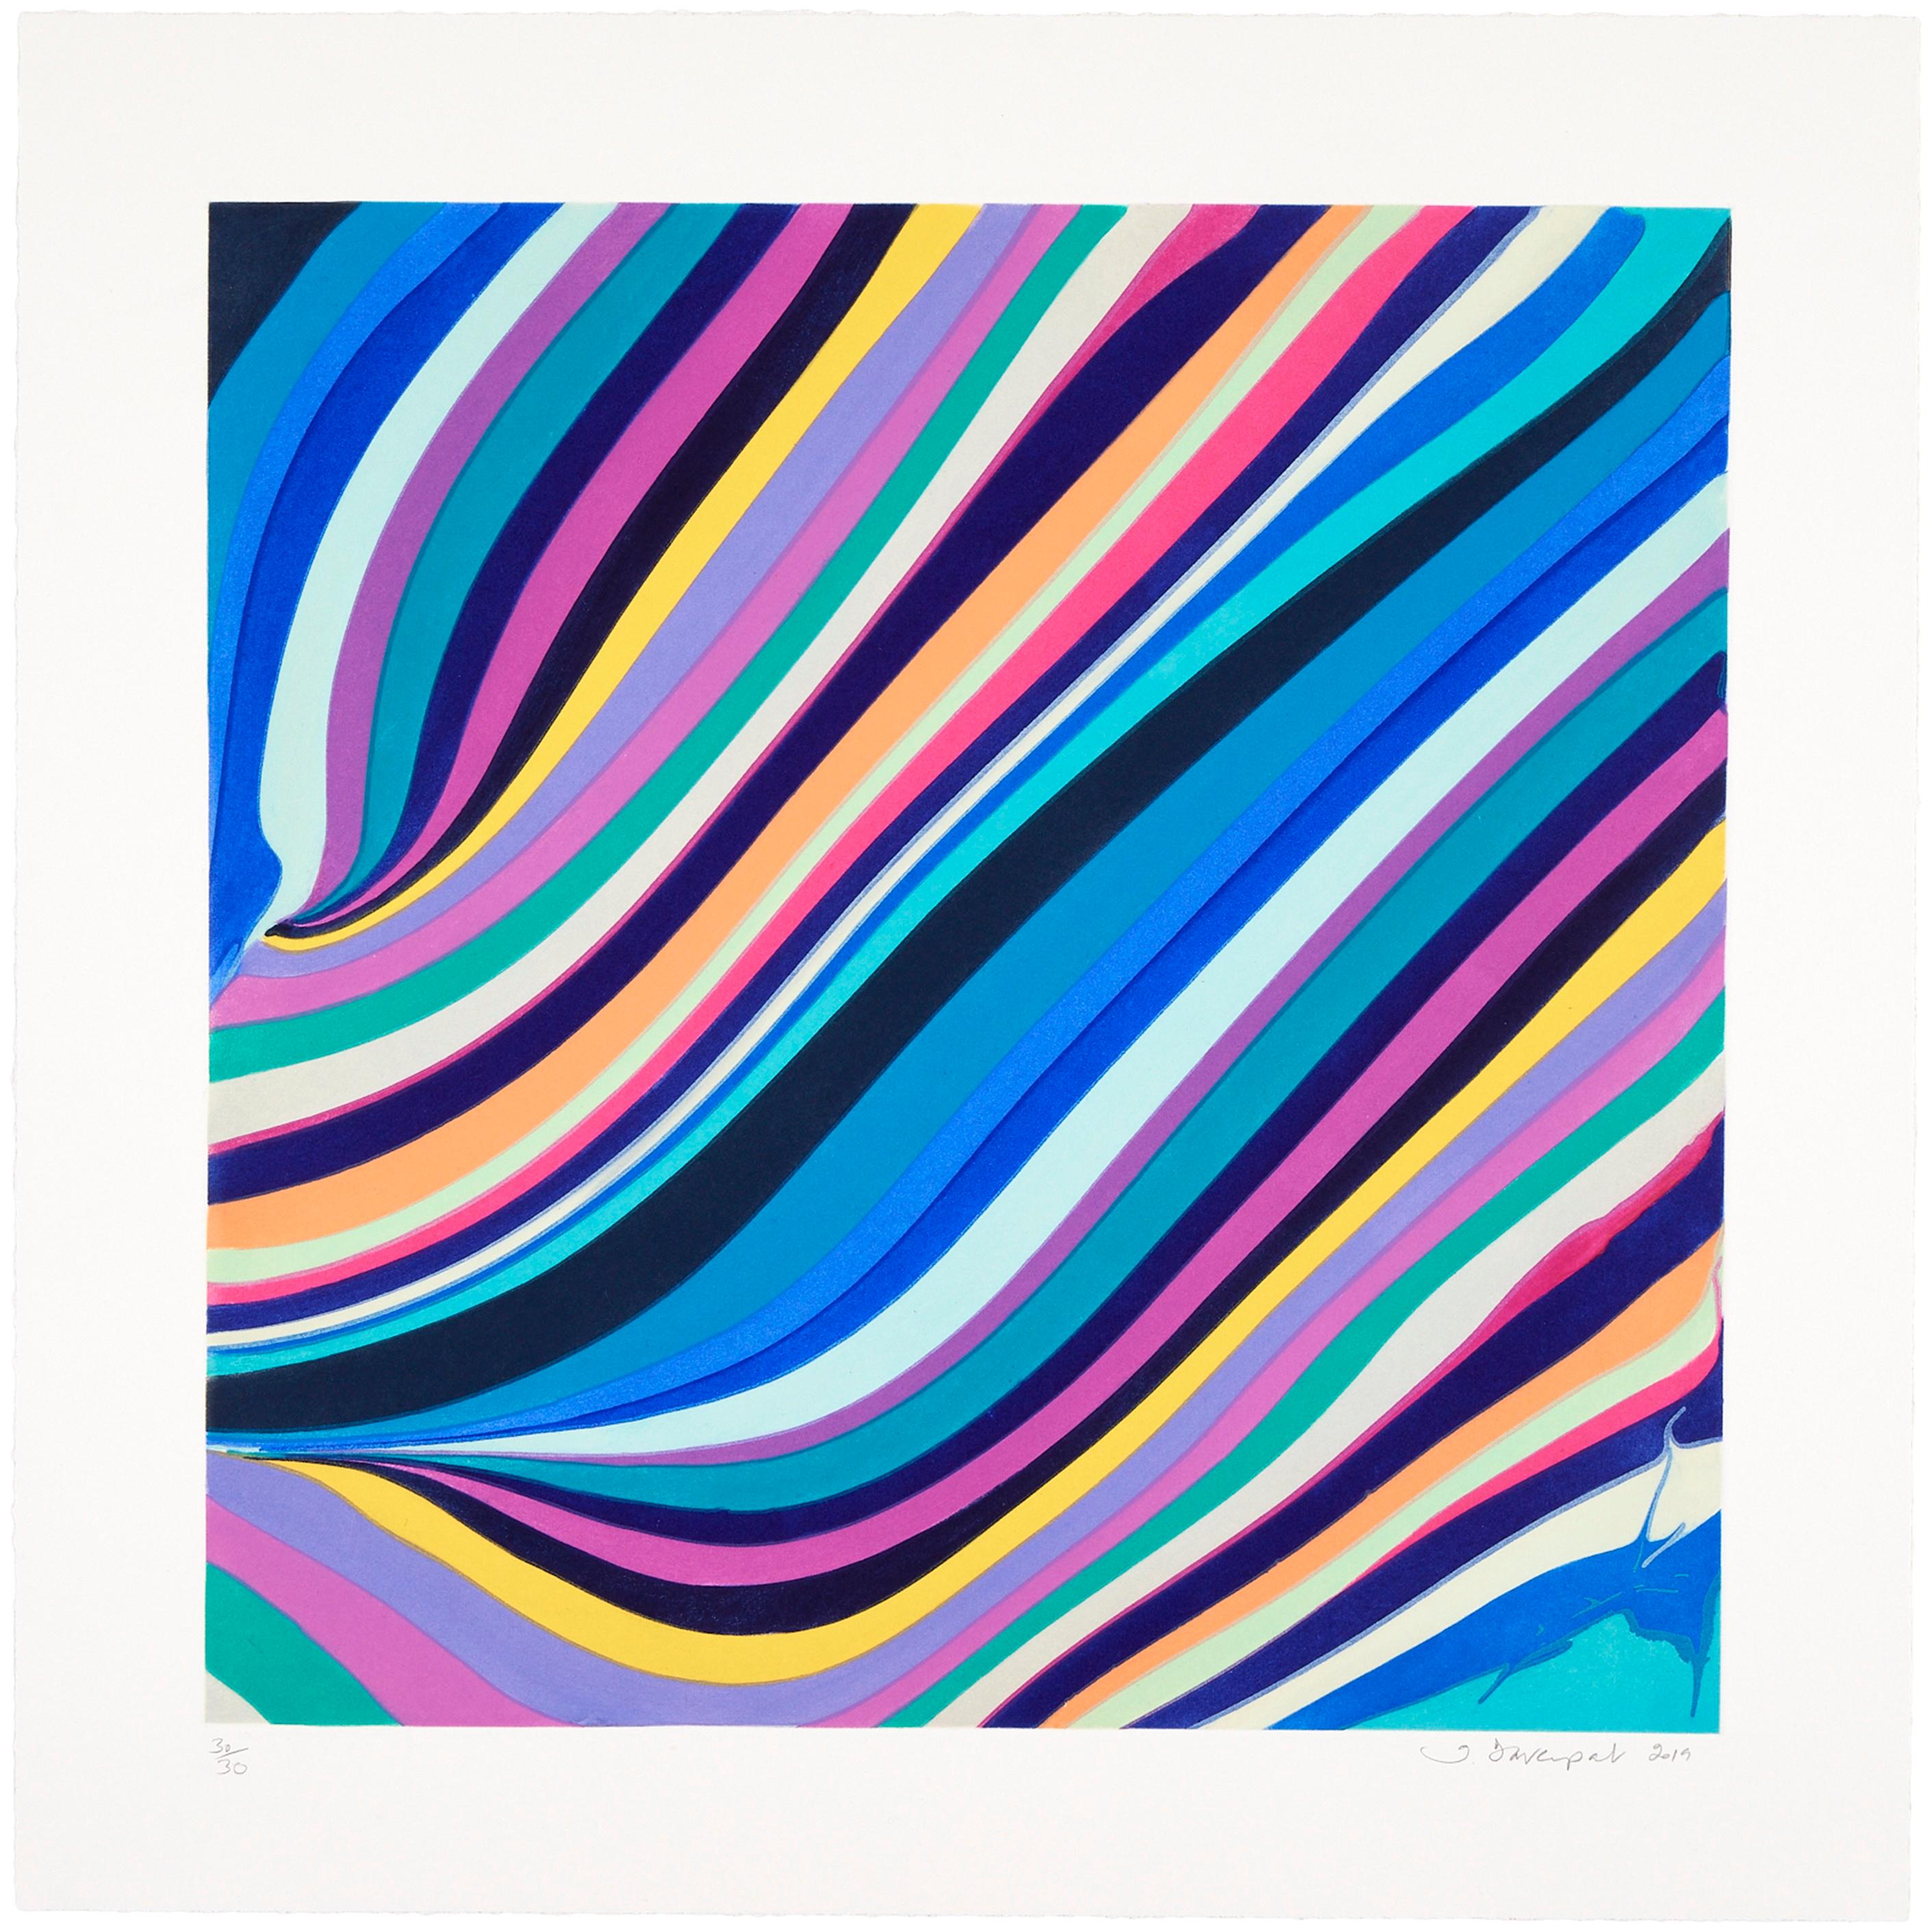 Evening, 2019
Ian Davenport

Etching on Canson Edition Bright White 320gsm paper
Signed, dated and numbered from the edition of 30
Published by Cristea Roberts
Image: 50 × 50 cm (19.7 × 19.7 in)
Sheet: 62 × 62 cm (24.4 × 24.4 in)